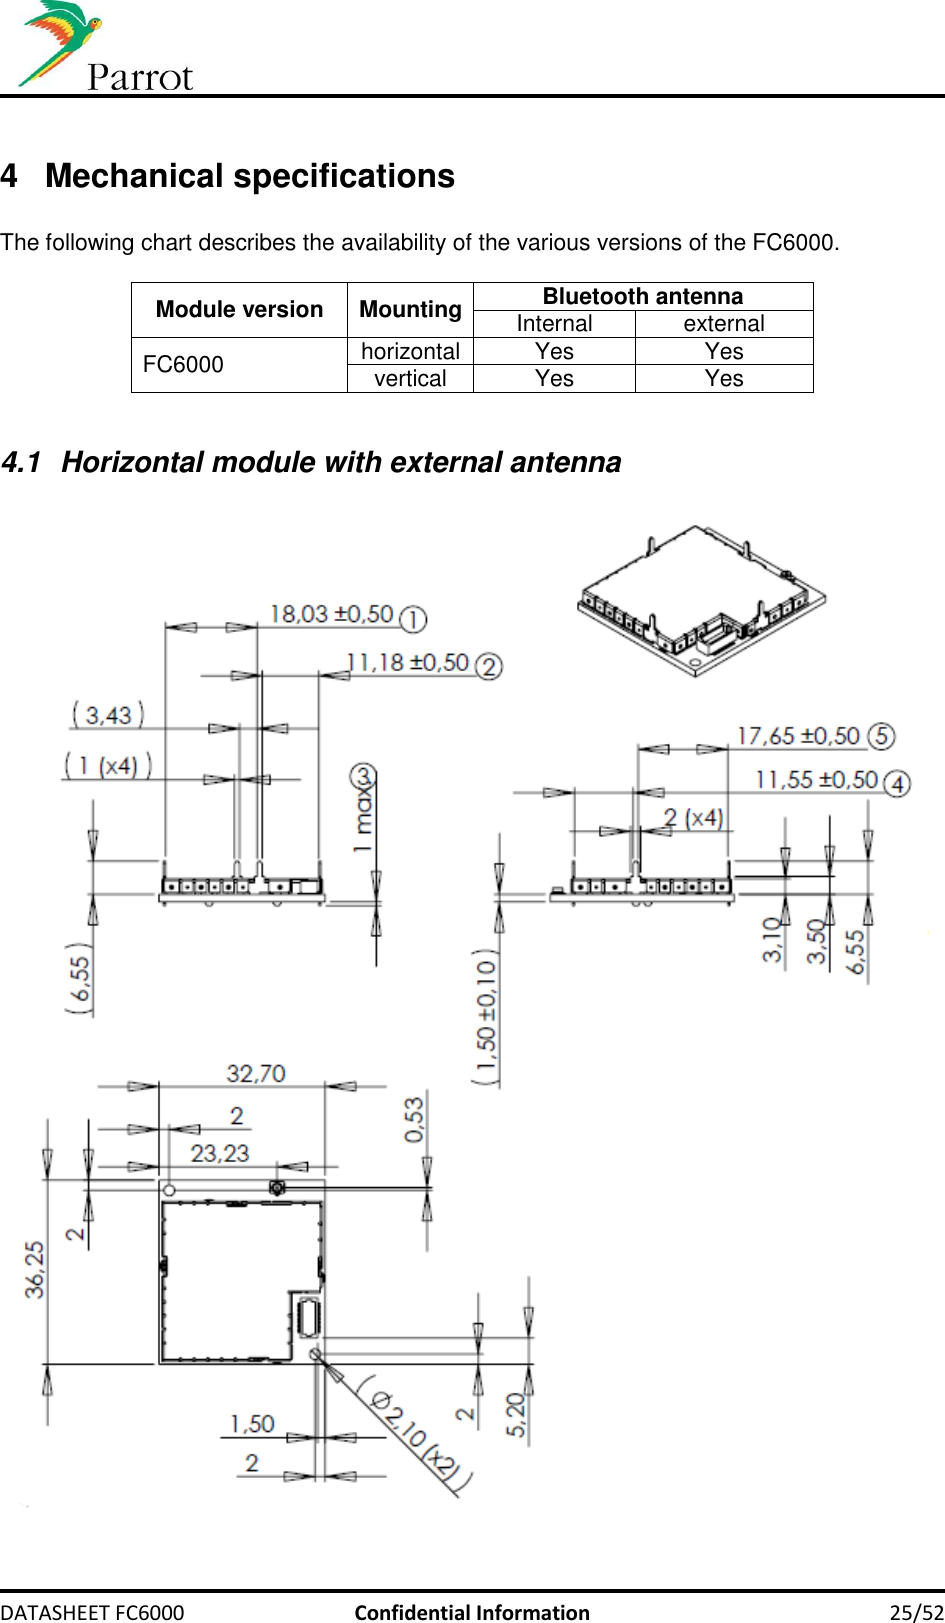     DATASHEET FC6000  Confidential Information 25/52  4  Mechanical specifications  The following chart describes the availability of the various versions of the FC6000.  Module version Mounting Bluetooth antenna Internal external FC6000 horizontal Yes Yes vertical Yes Yes  4.1  Horizontal module with external antenna   